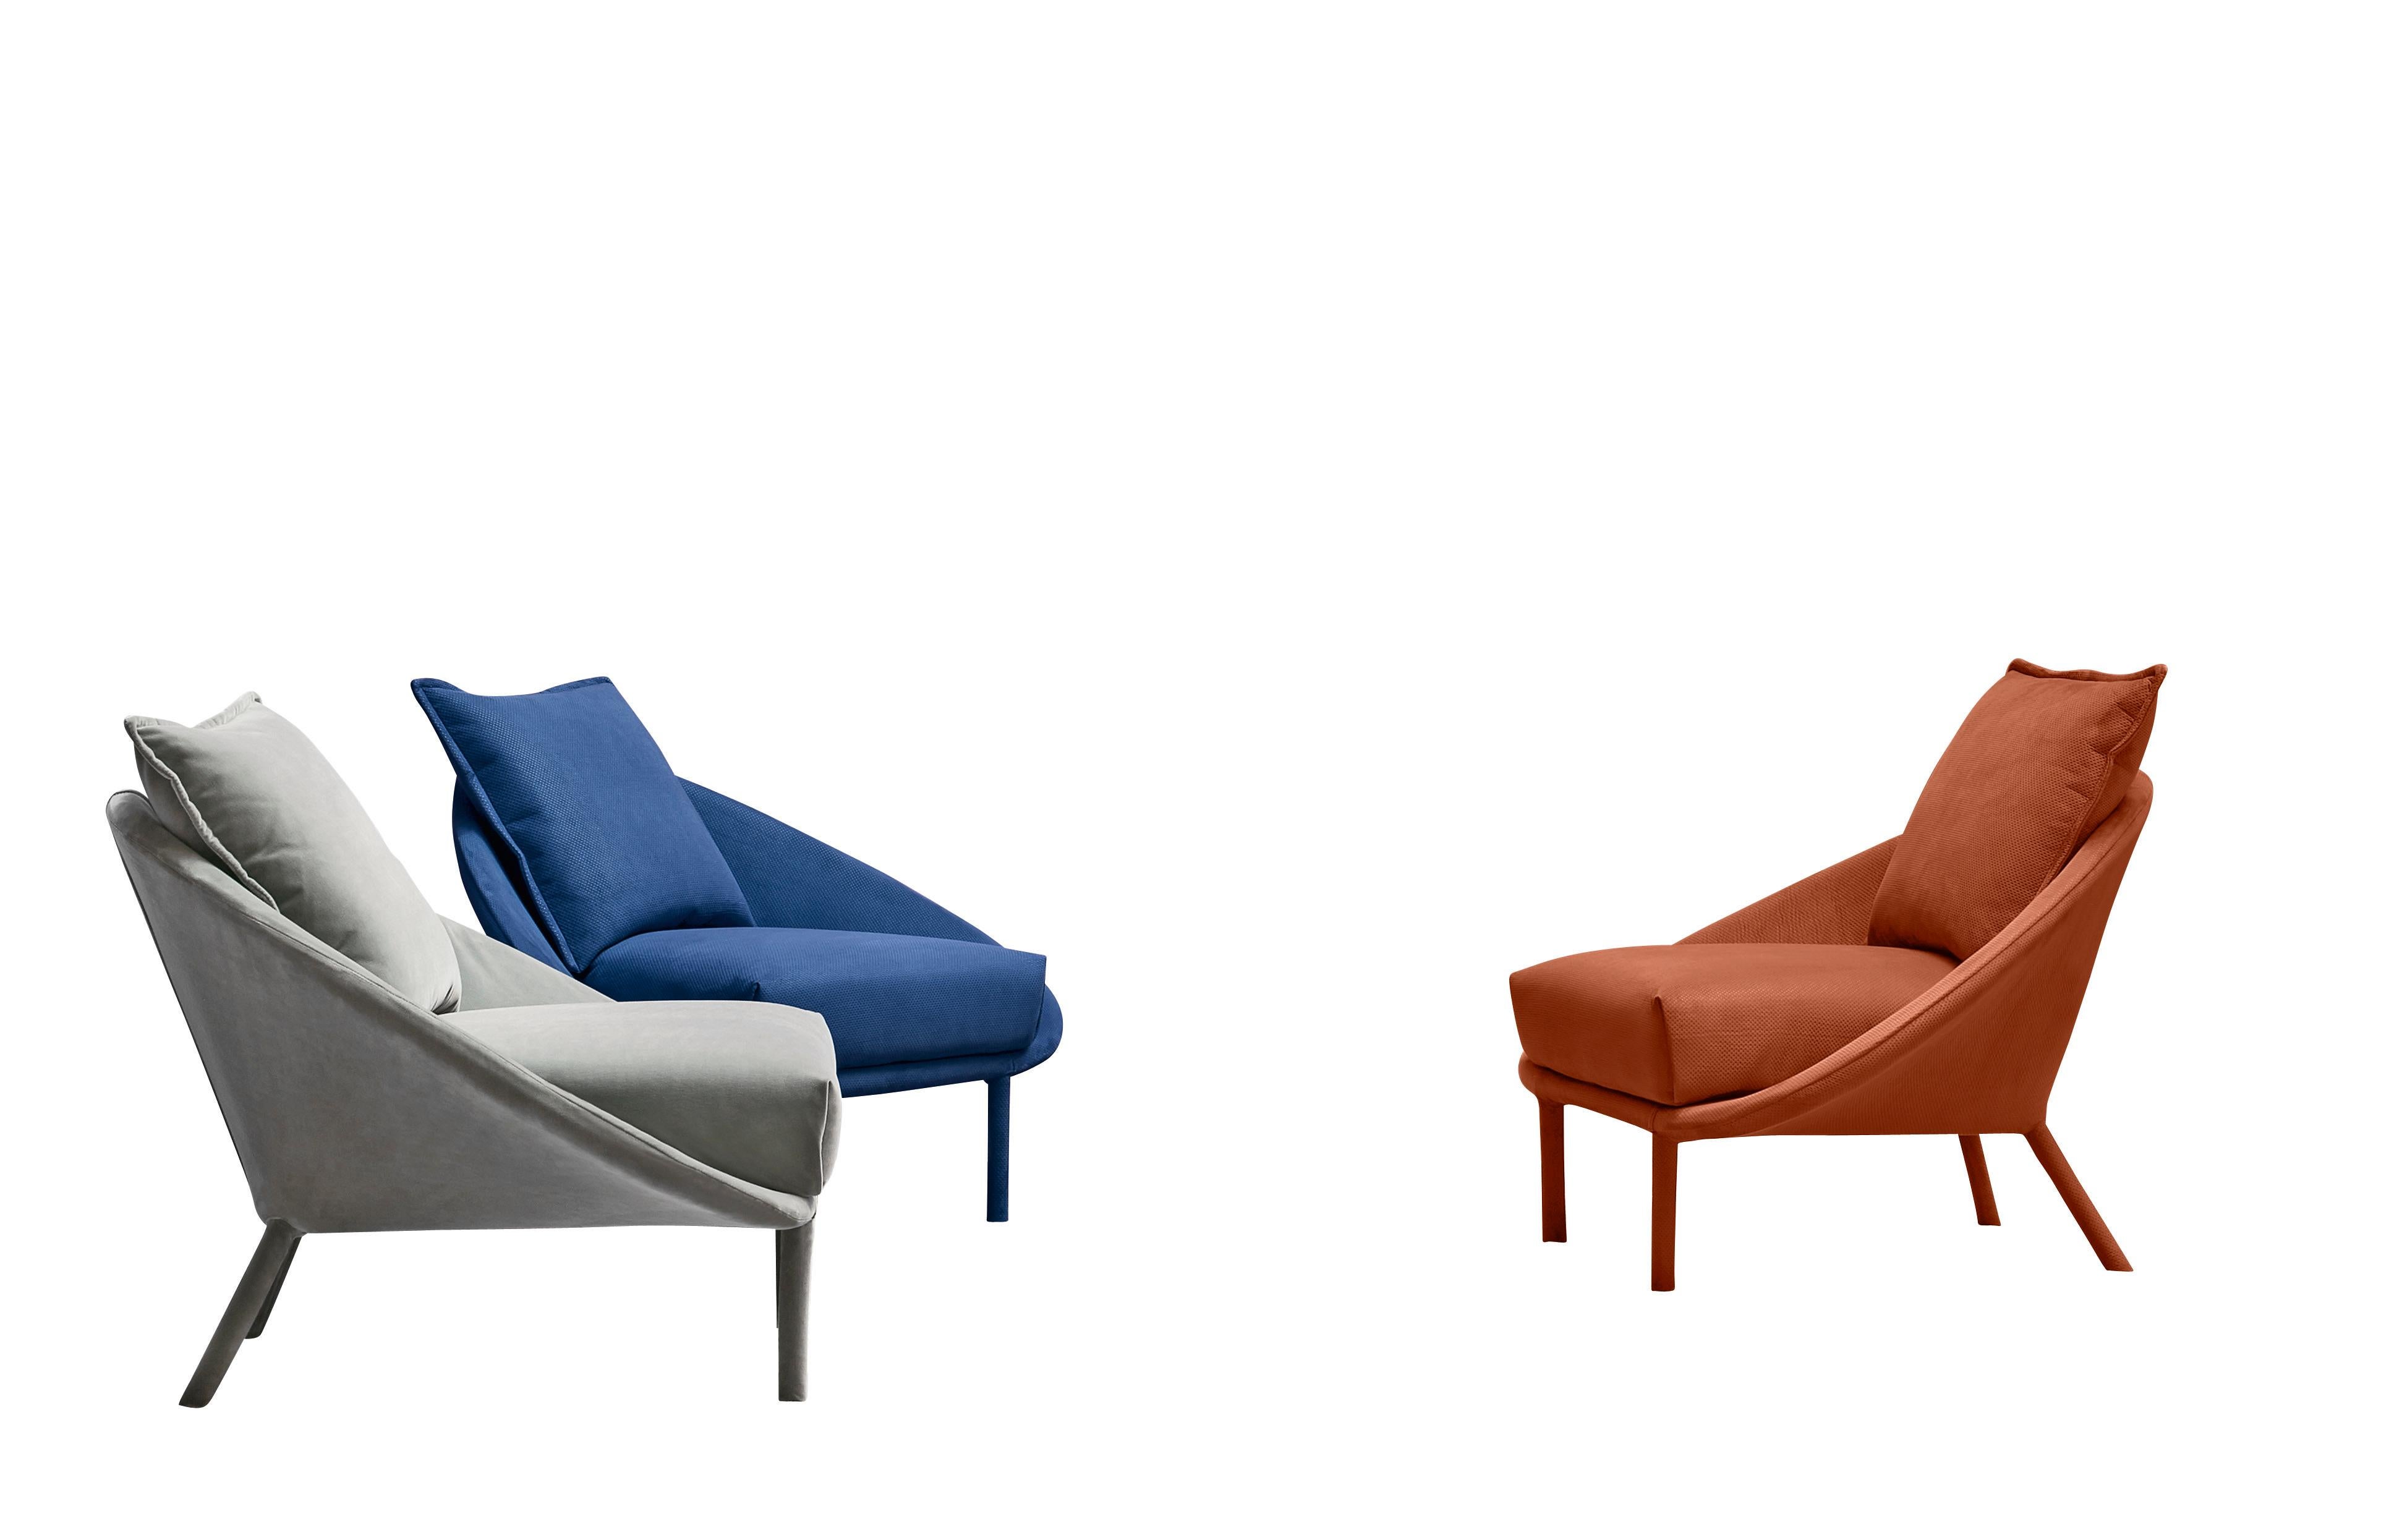 Lem Armchairs in Metal Structure and Upholstery, by Francesco Beghetto For Sale 1